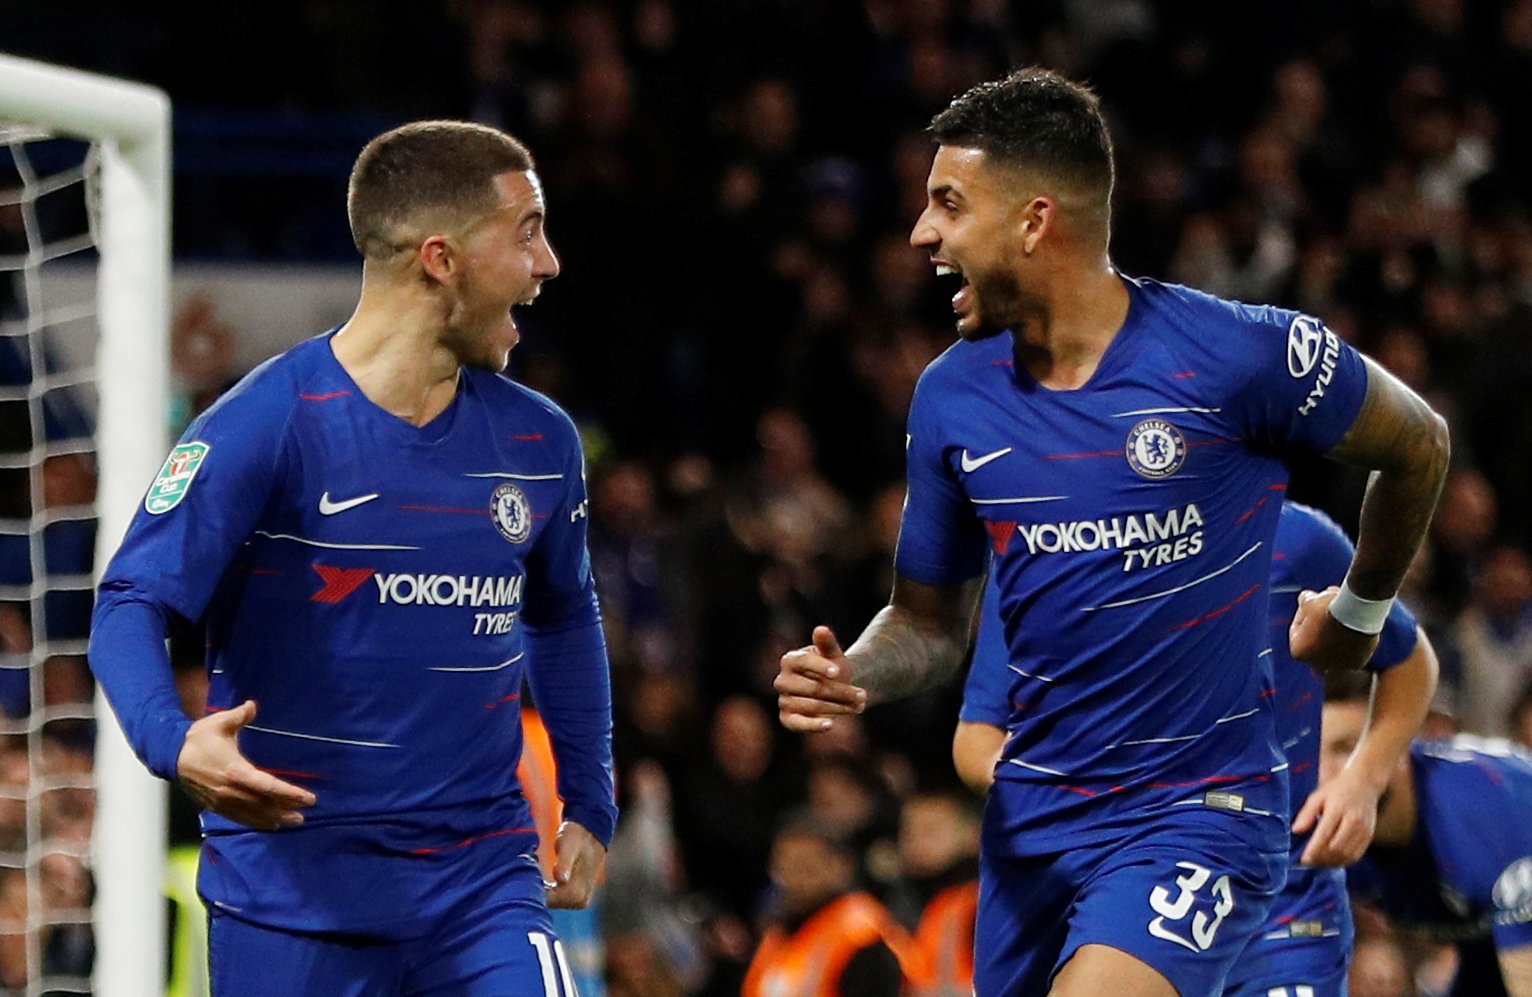 Sarri Hails Emerson After "Quality" Display Against Spurs